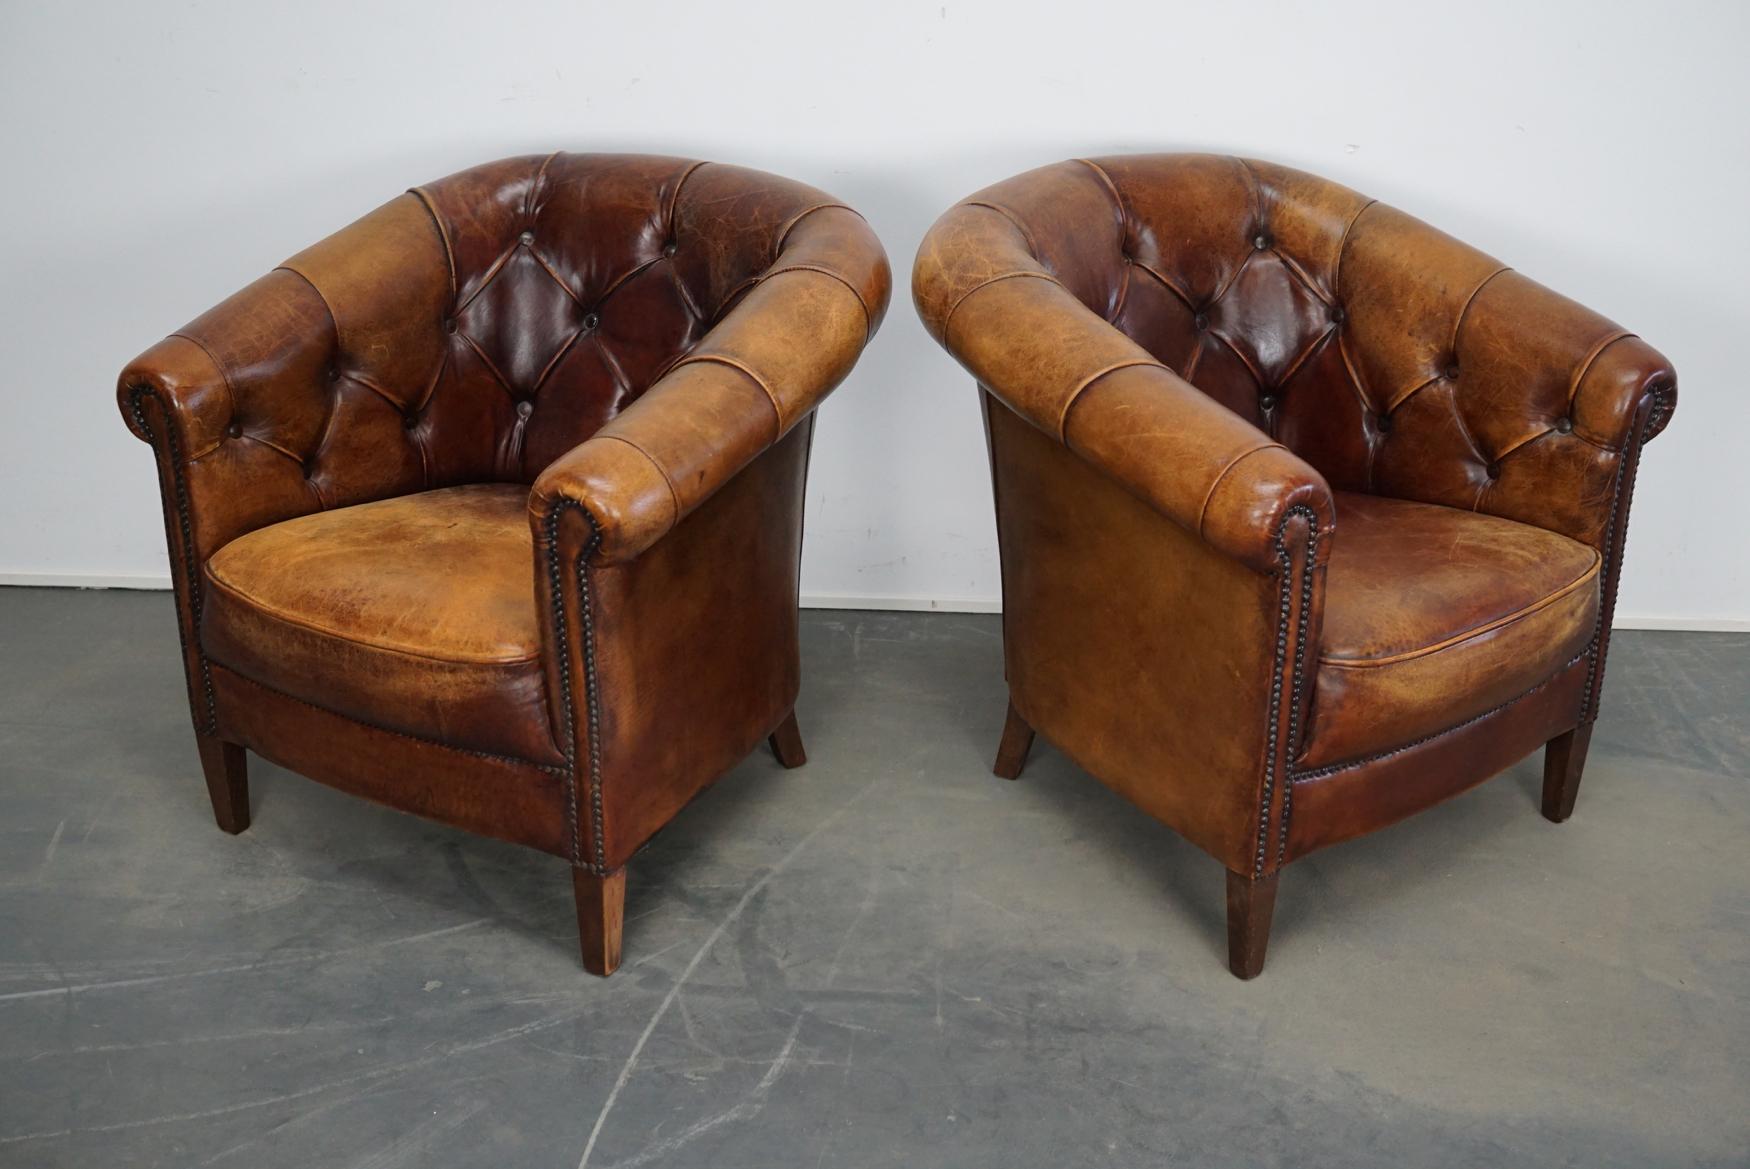 Vintage Dutch Chesterfield Cognac Leather Club Chairs, Set of 2 10